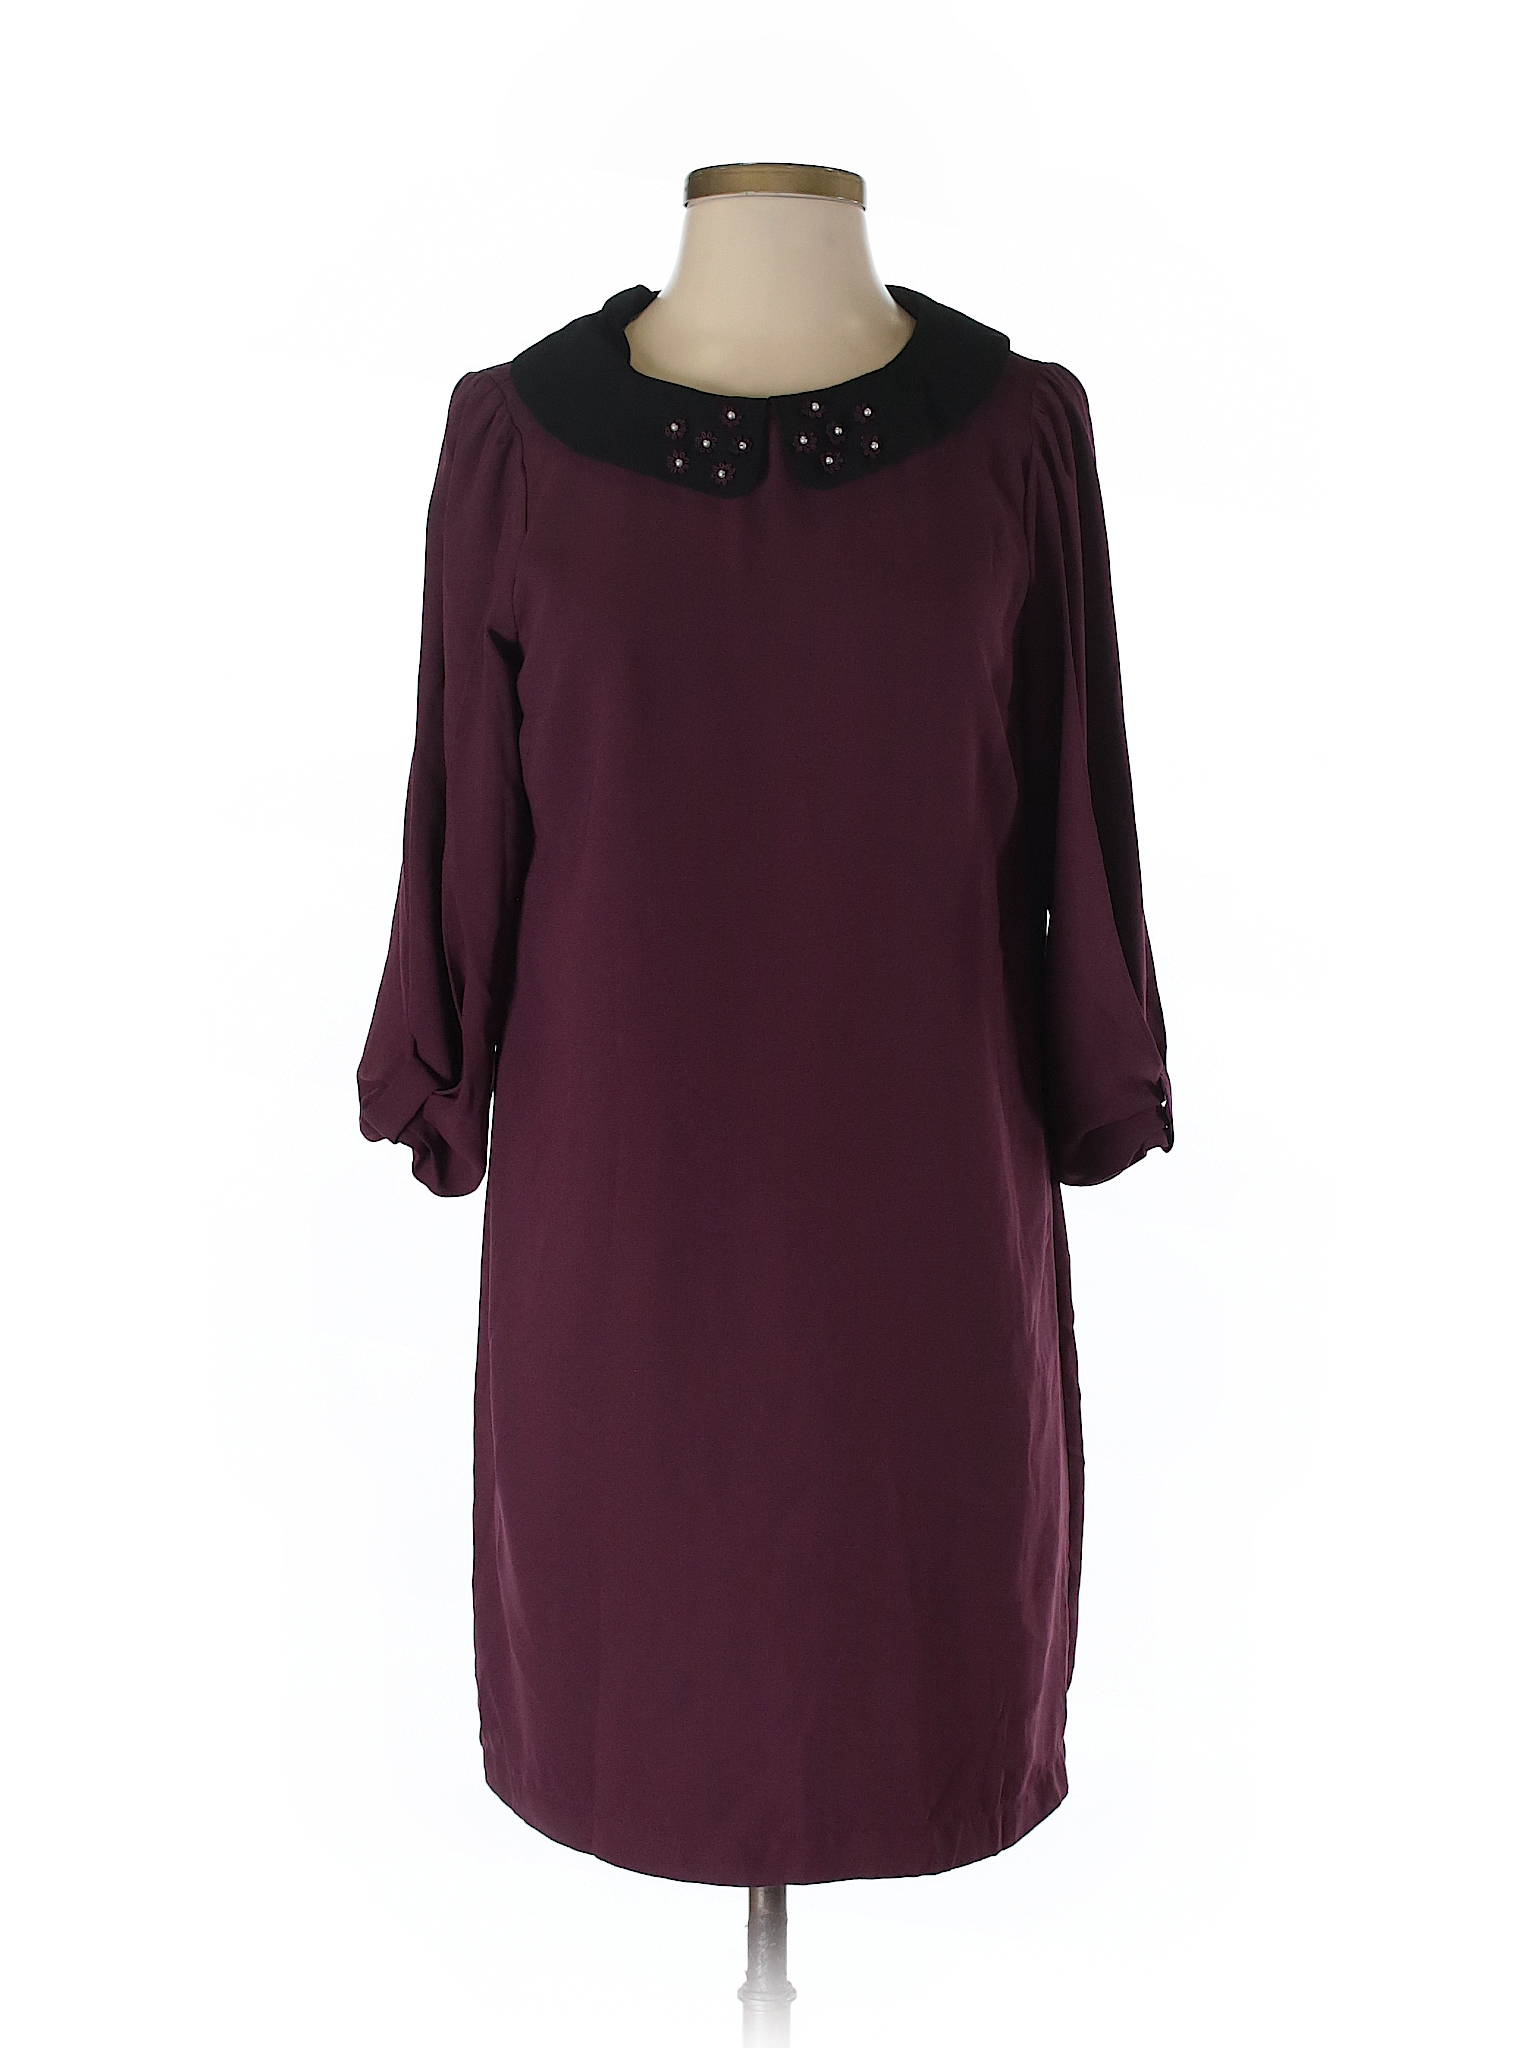 LC Lauren Conrad 100% Polyester Solid Burgundy Casual Dress Size S - 76 ...